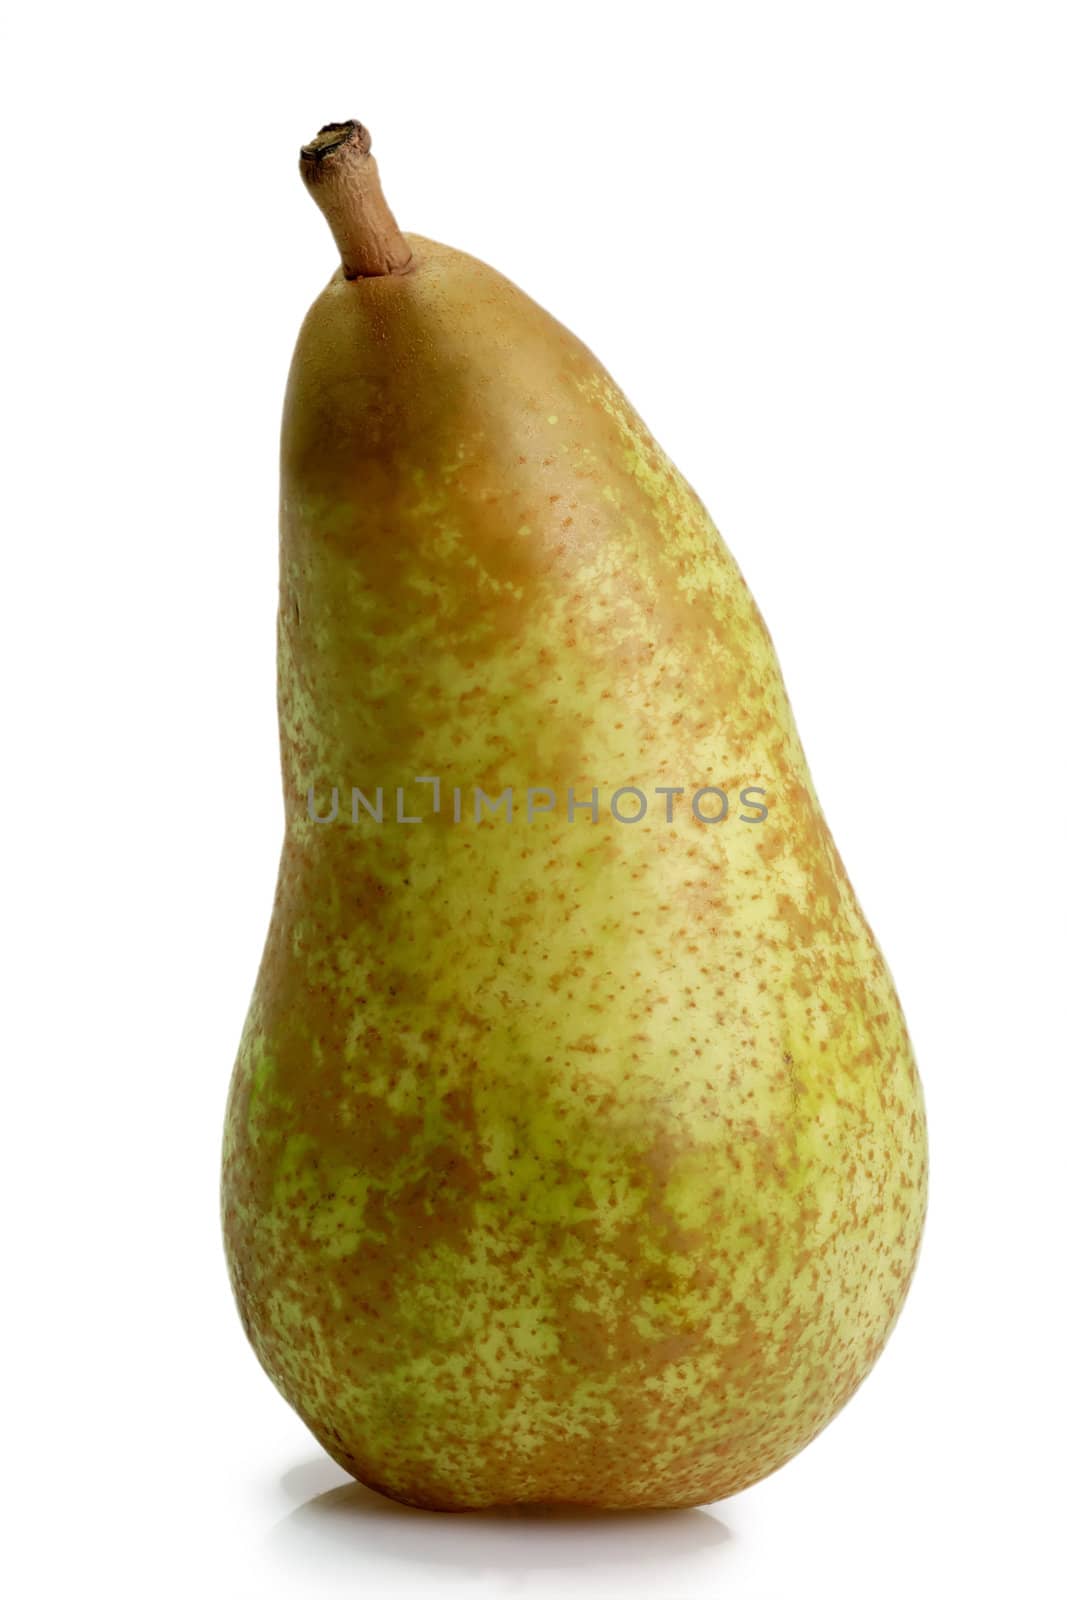 One pear on bright background. Shot in sutdio